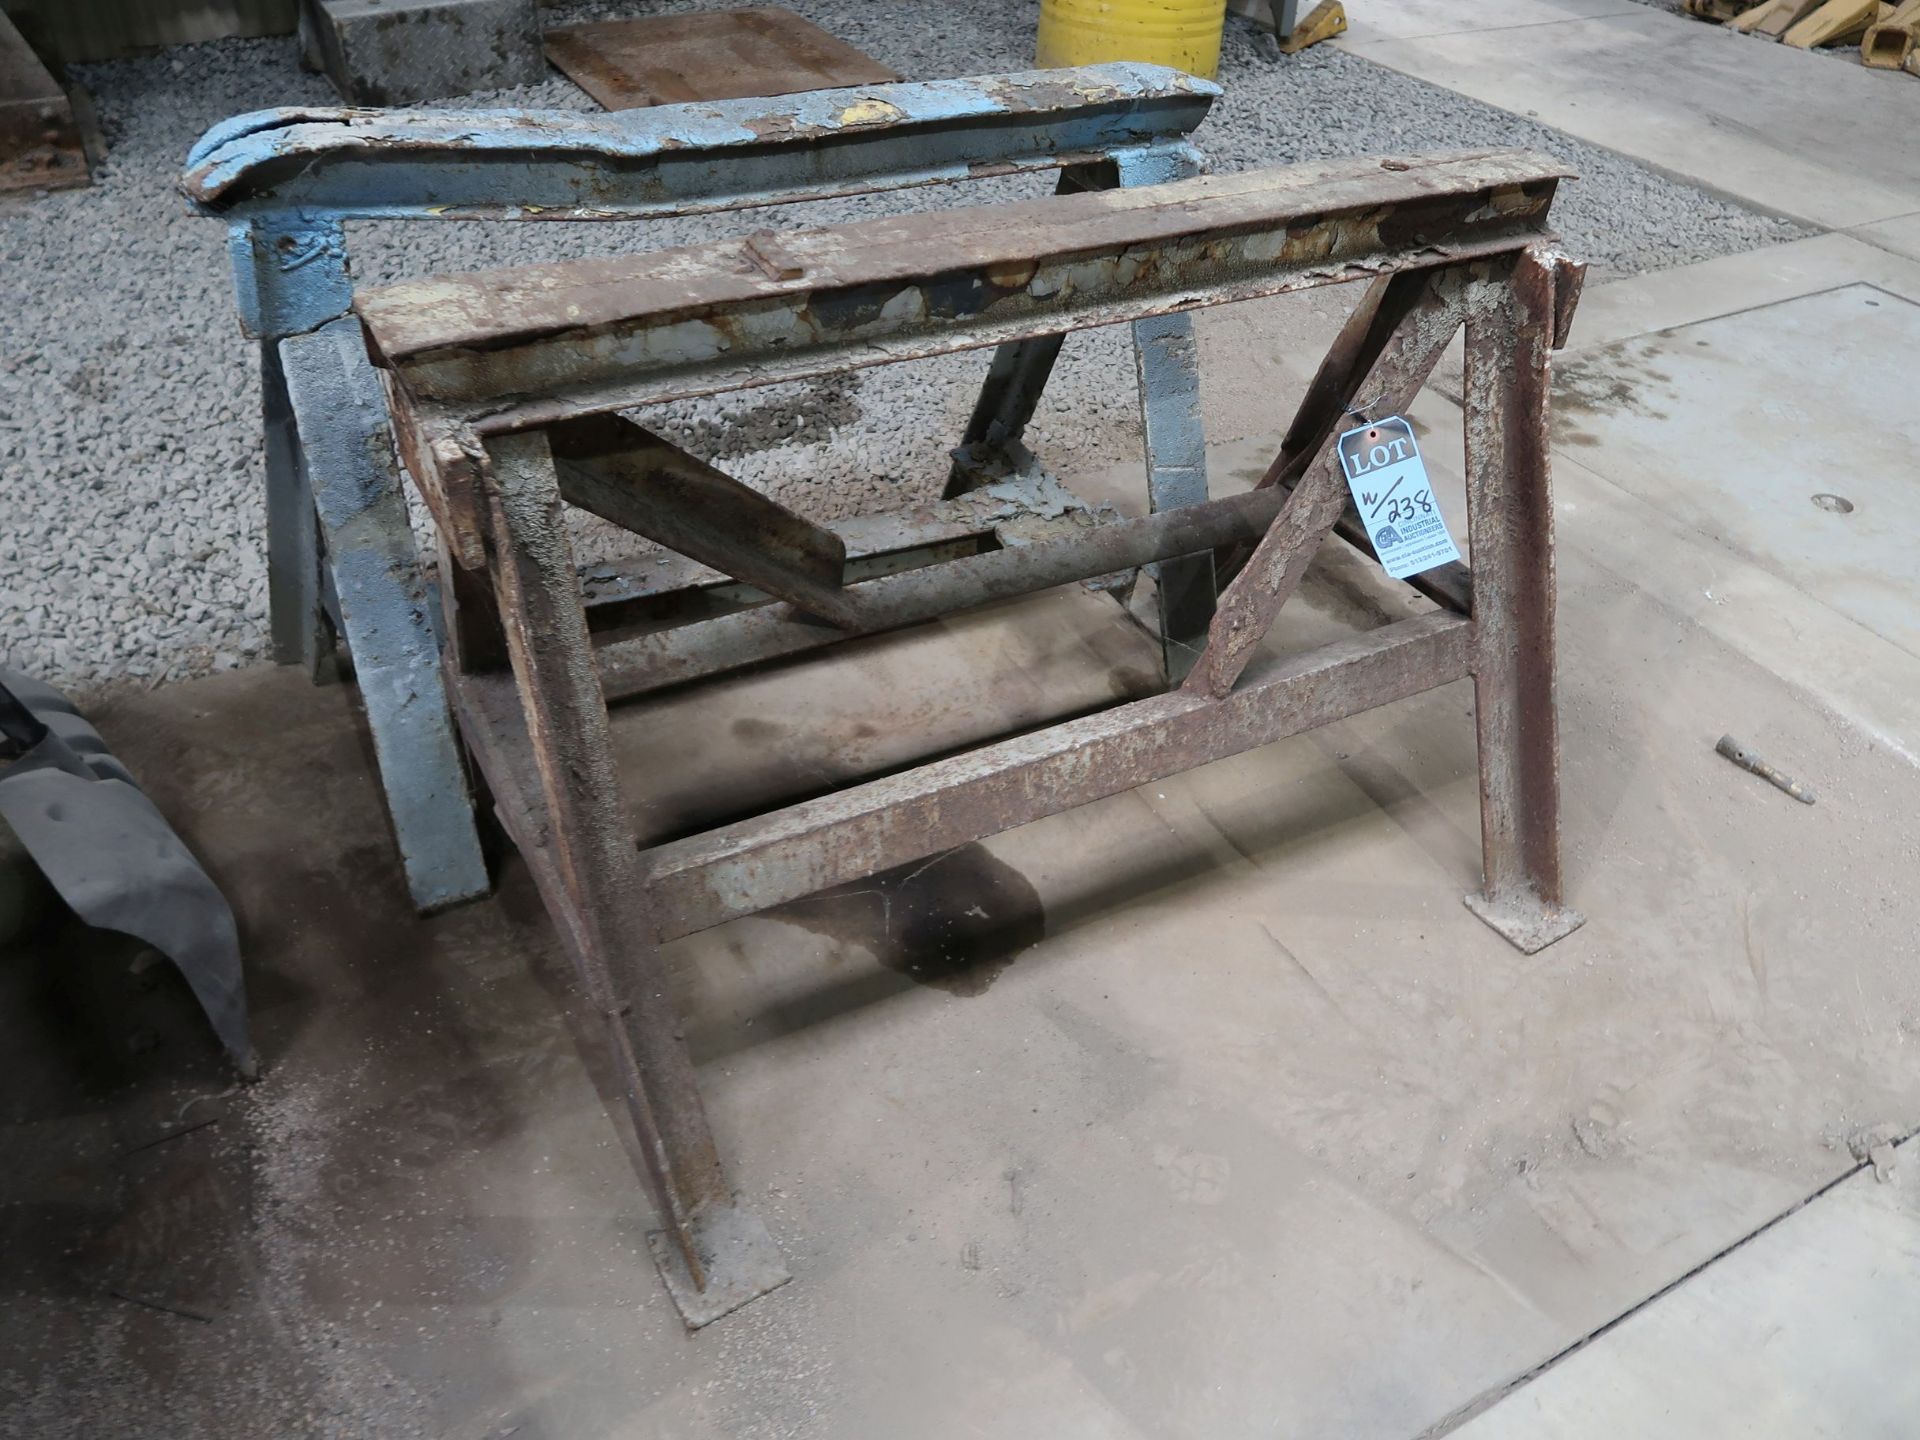 (LOT) STEEL TABLE WITH 6" BENCH VISE, (2) STEEL SAW HORSES, TRUCK TIRE CHUCKS, STEEL SHELF - Image 2 of 3